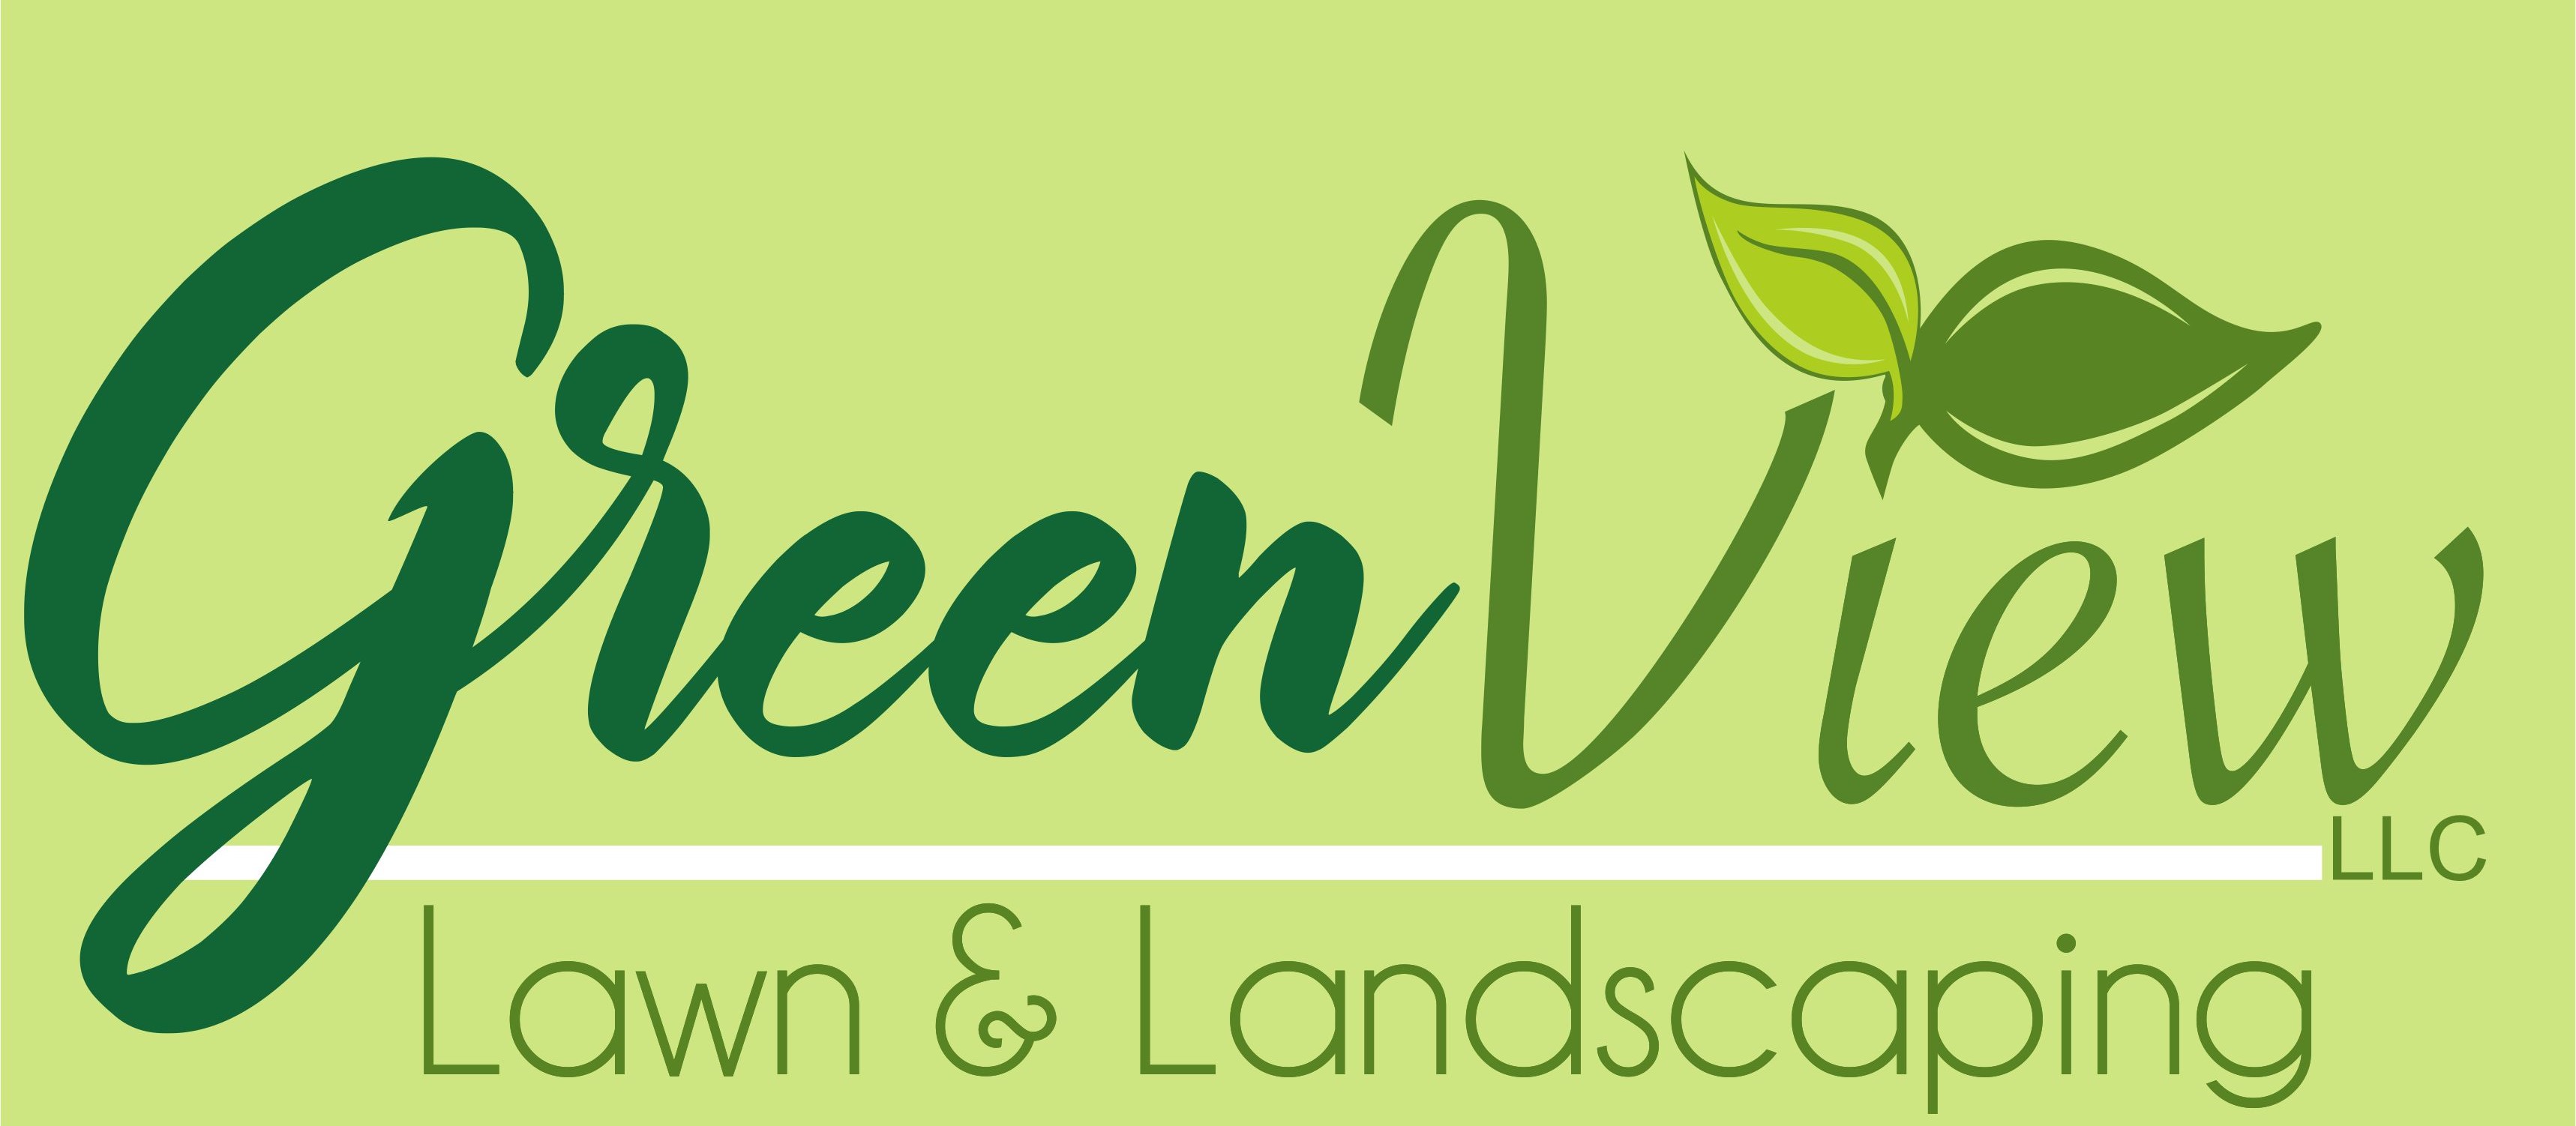 Green View Lawn and Landscaping Logo